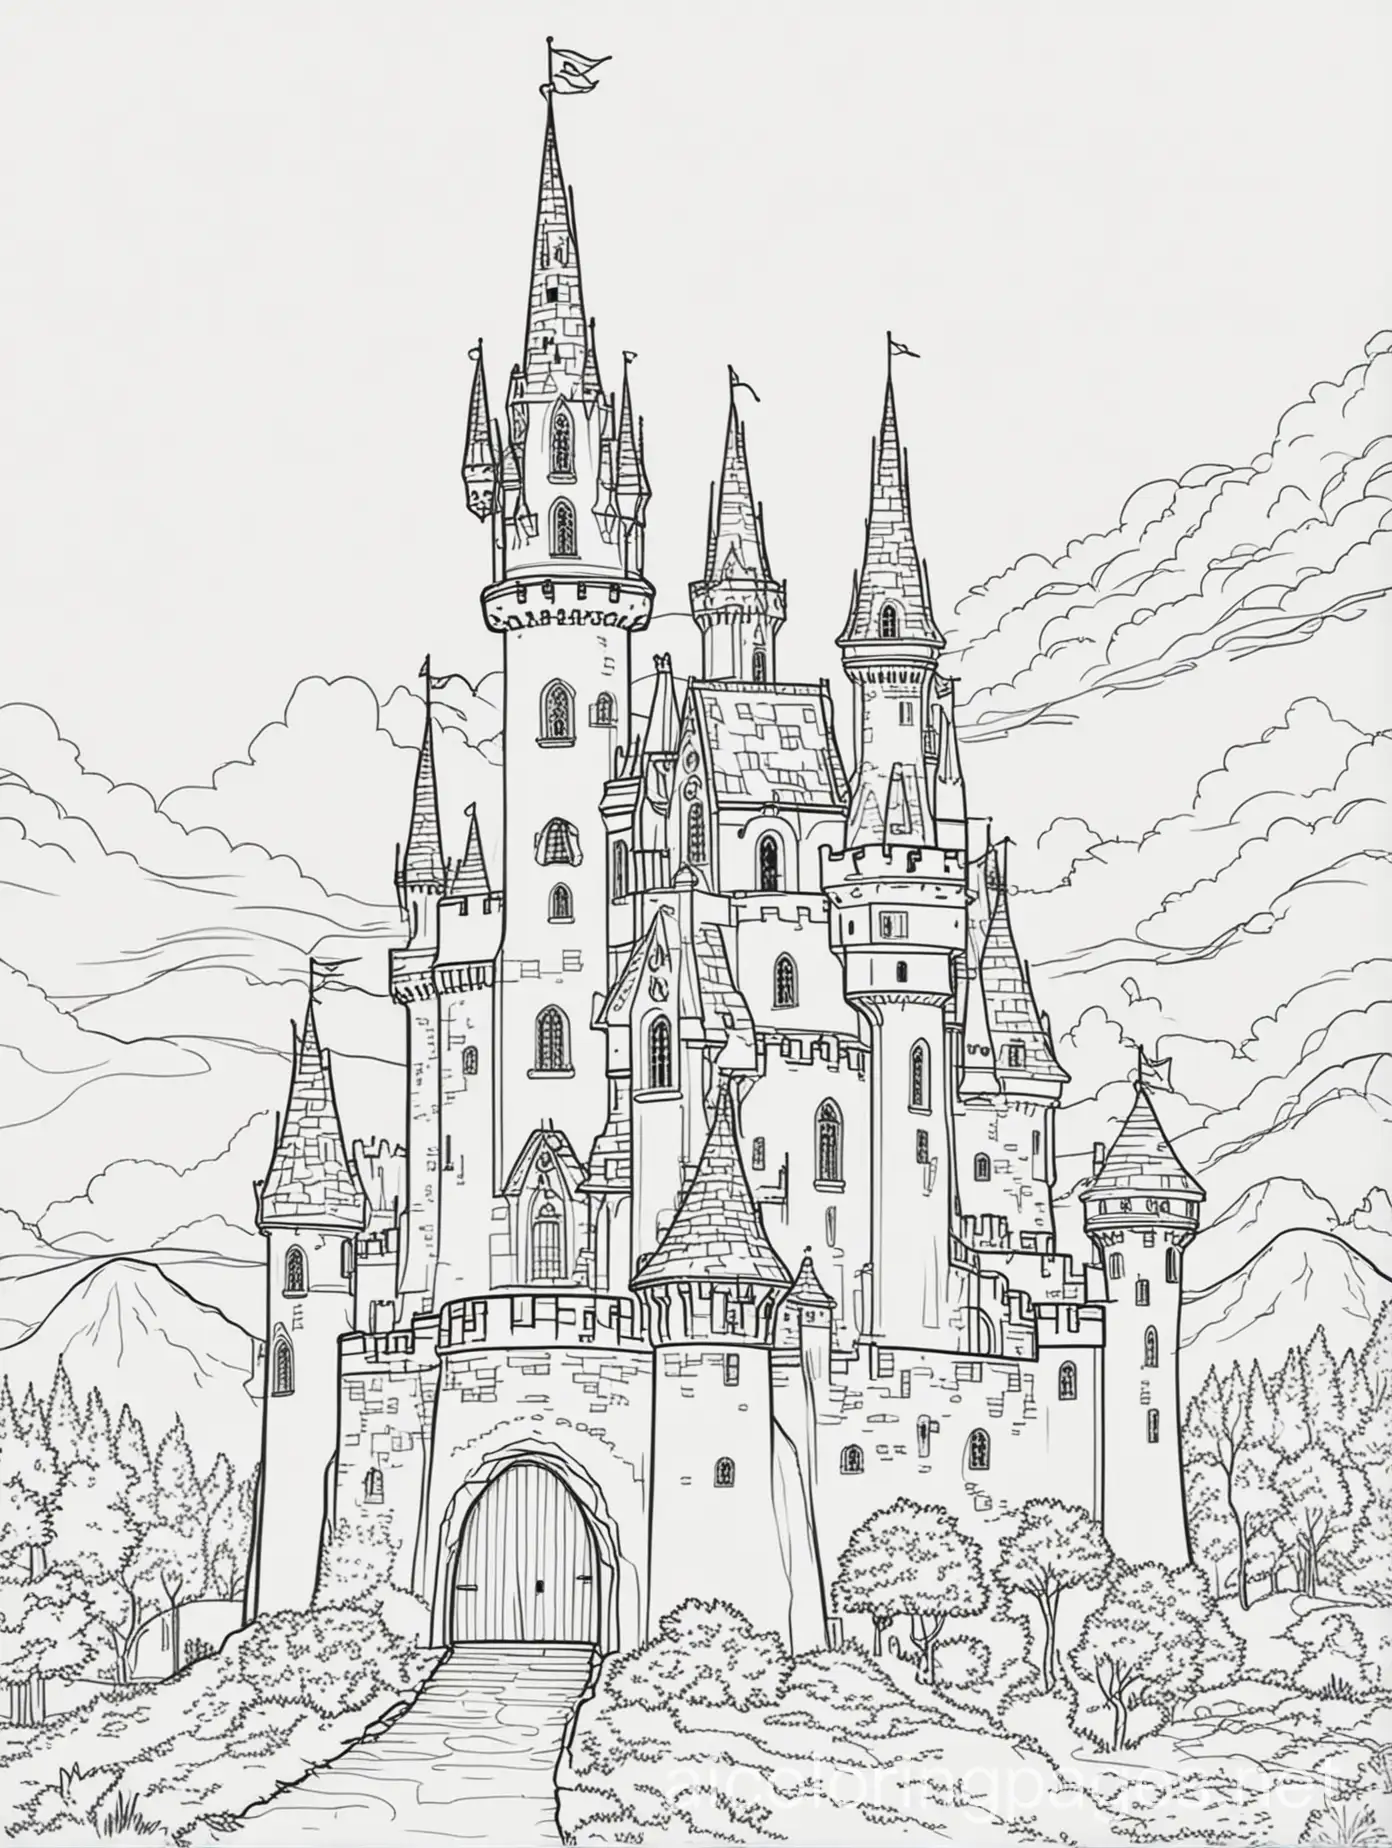 Simple-Fairy-Tale-Castle-Coloring-Page-in-Black-and-White